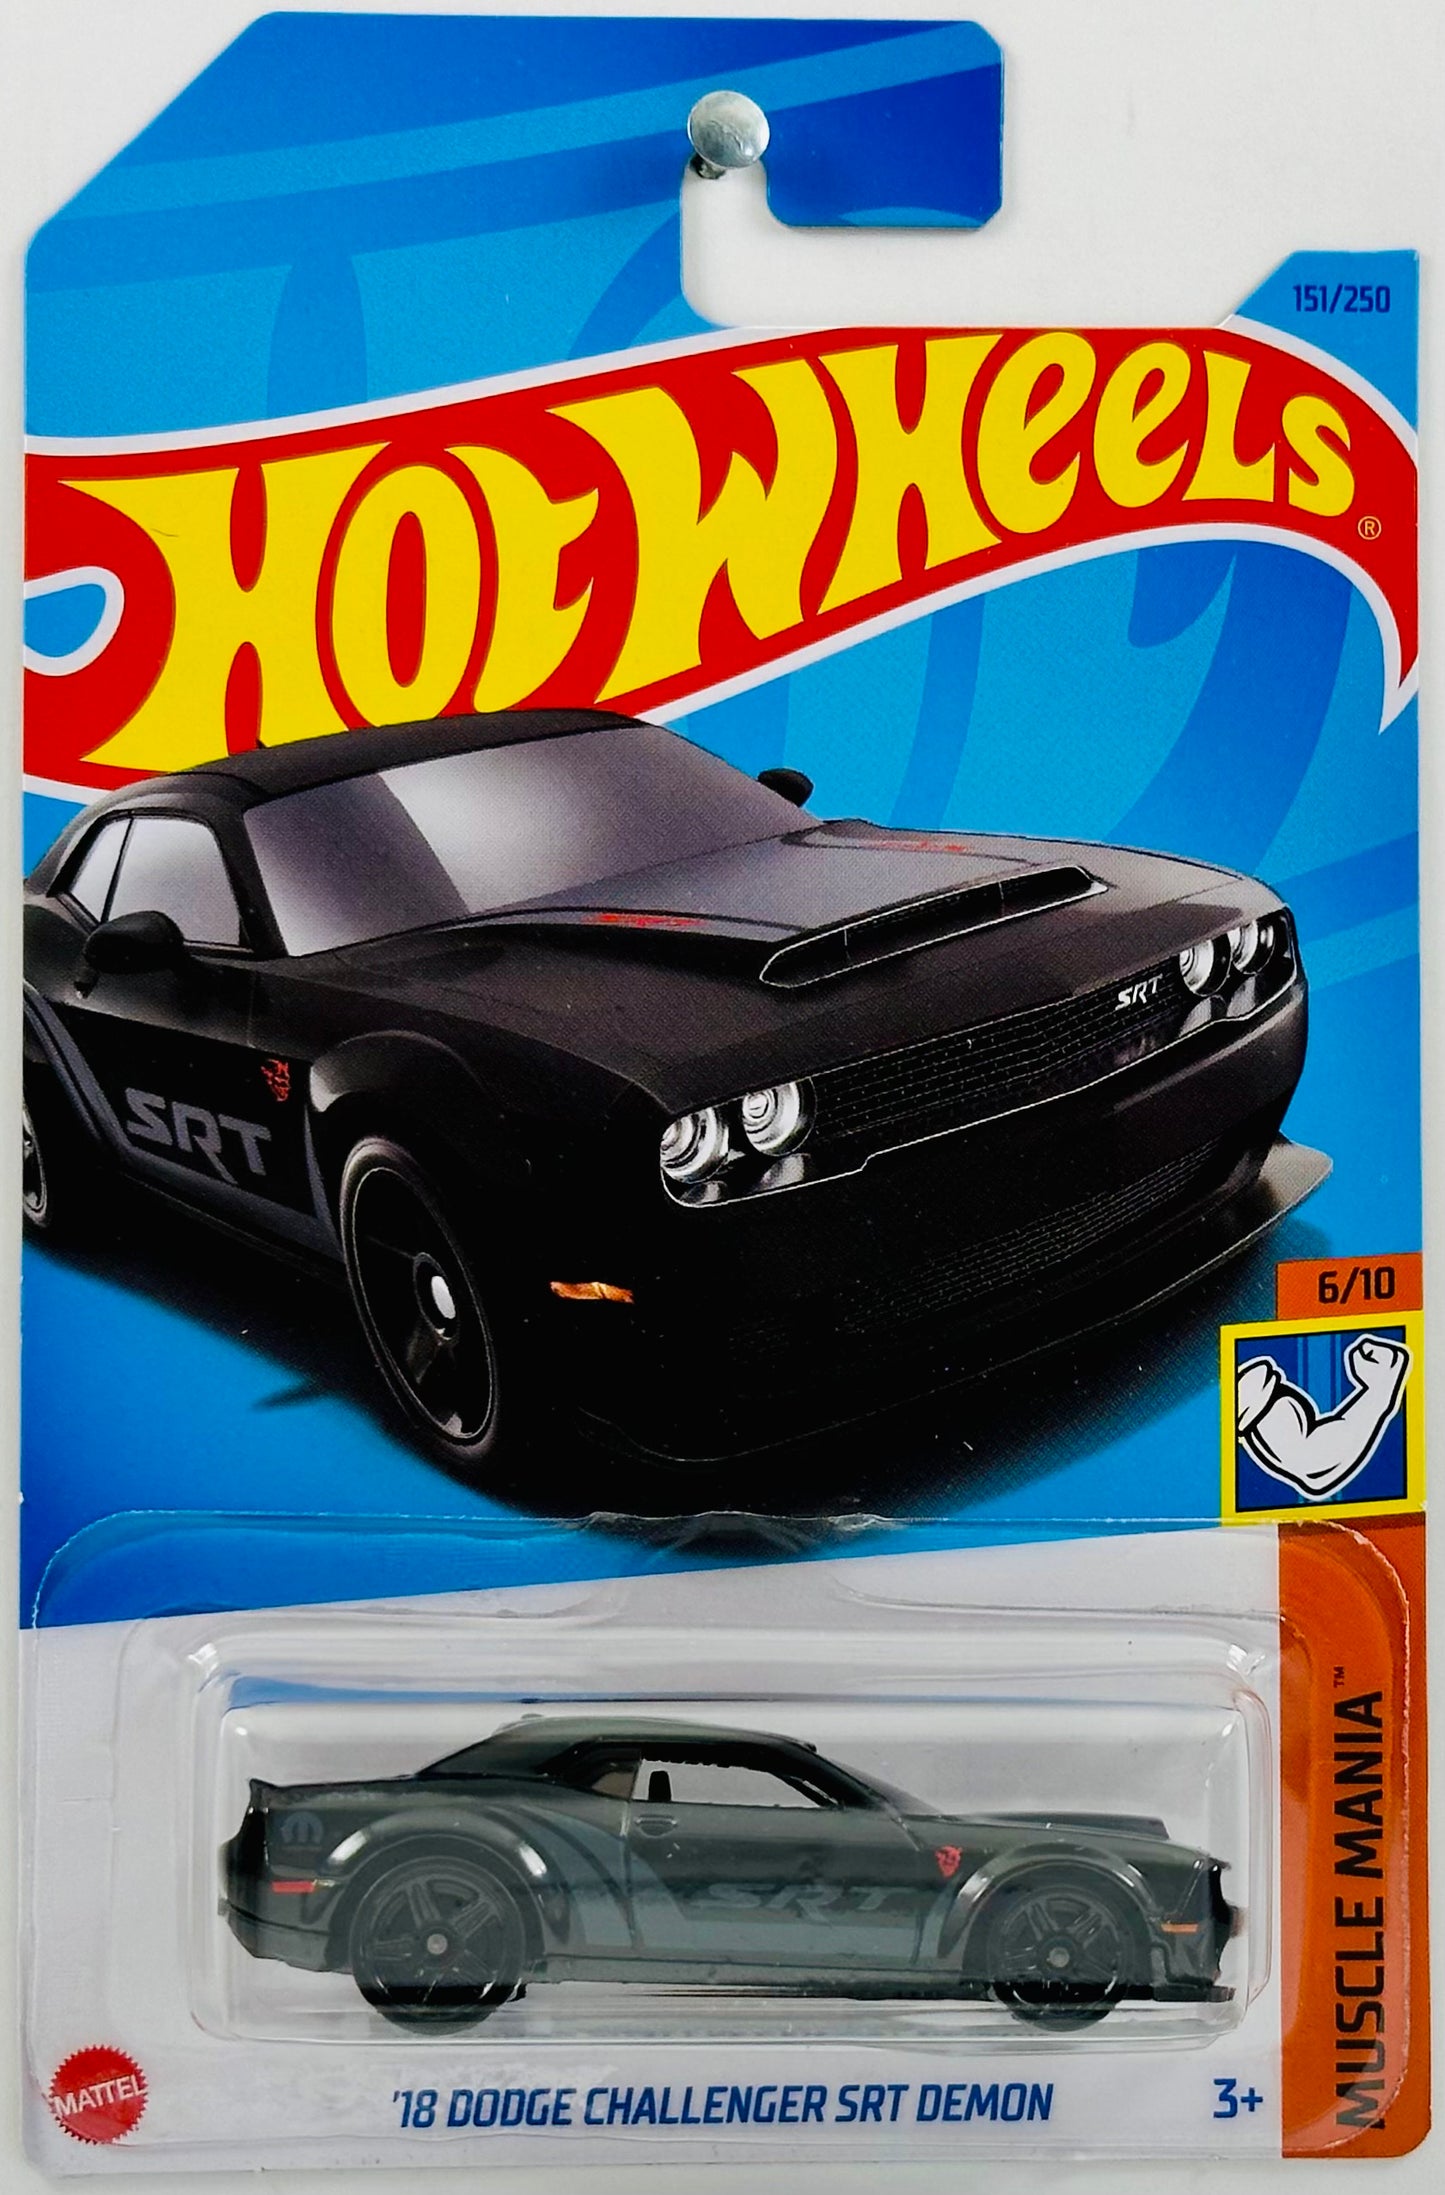 Hot Wheels 2023 - Collector # 151/250 - Muscle Mania 06/10 - '18 Dodge Challenger SRT Demon - Black - IC